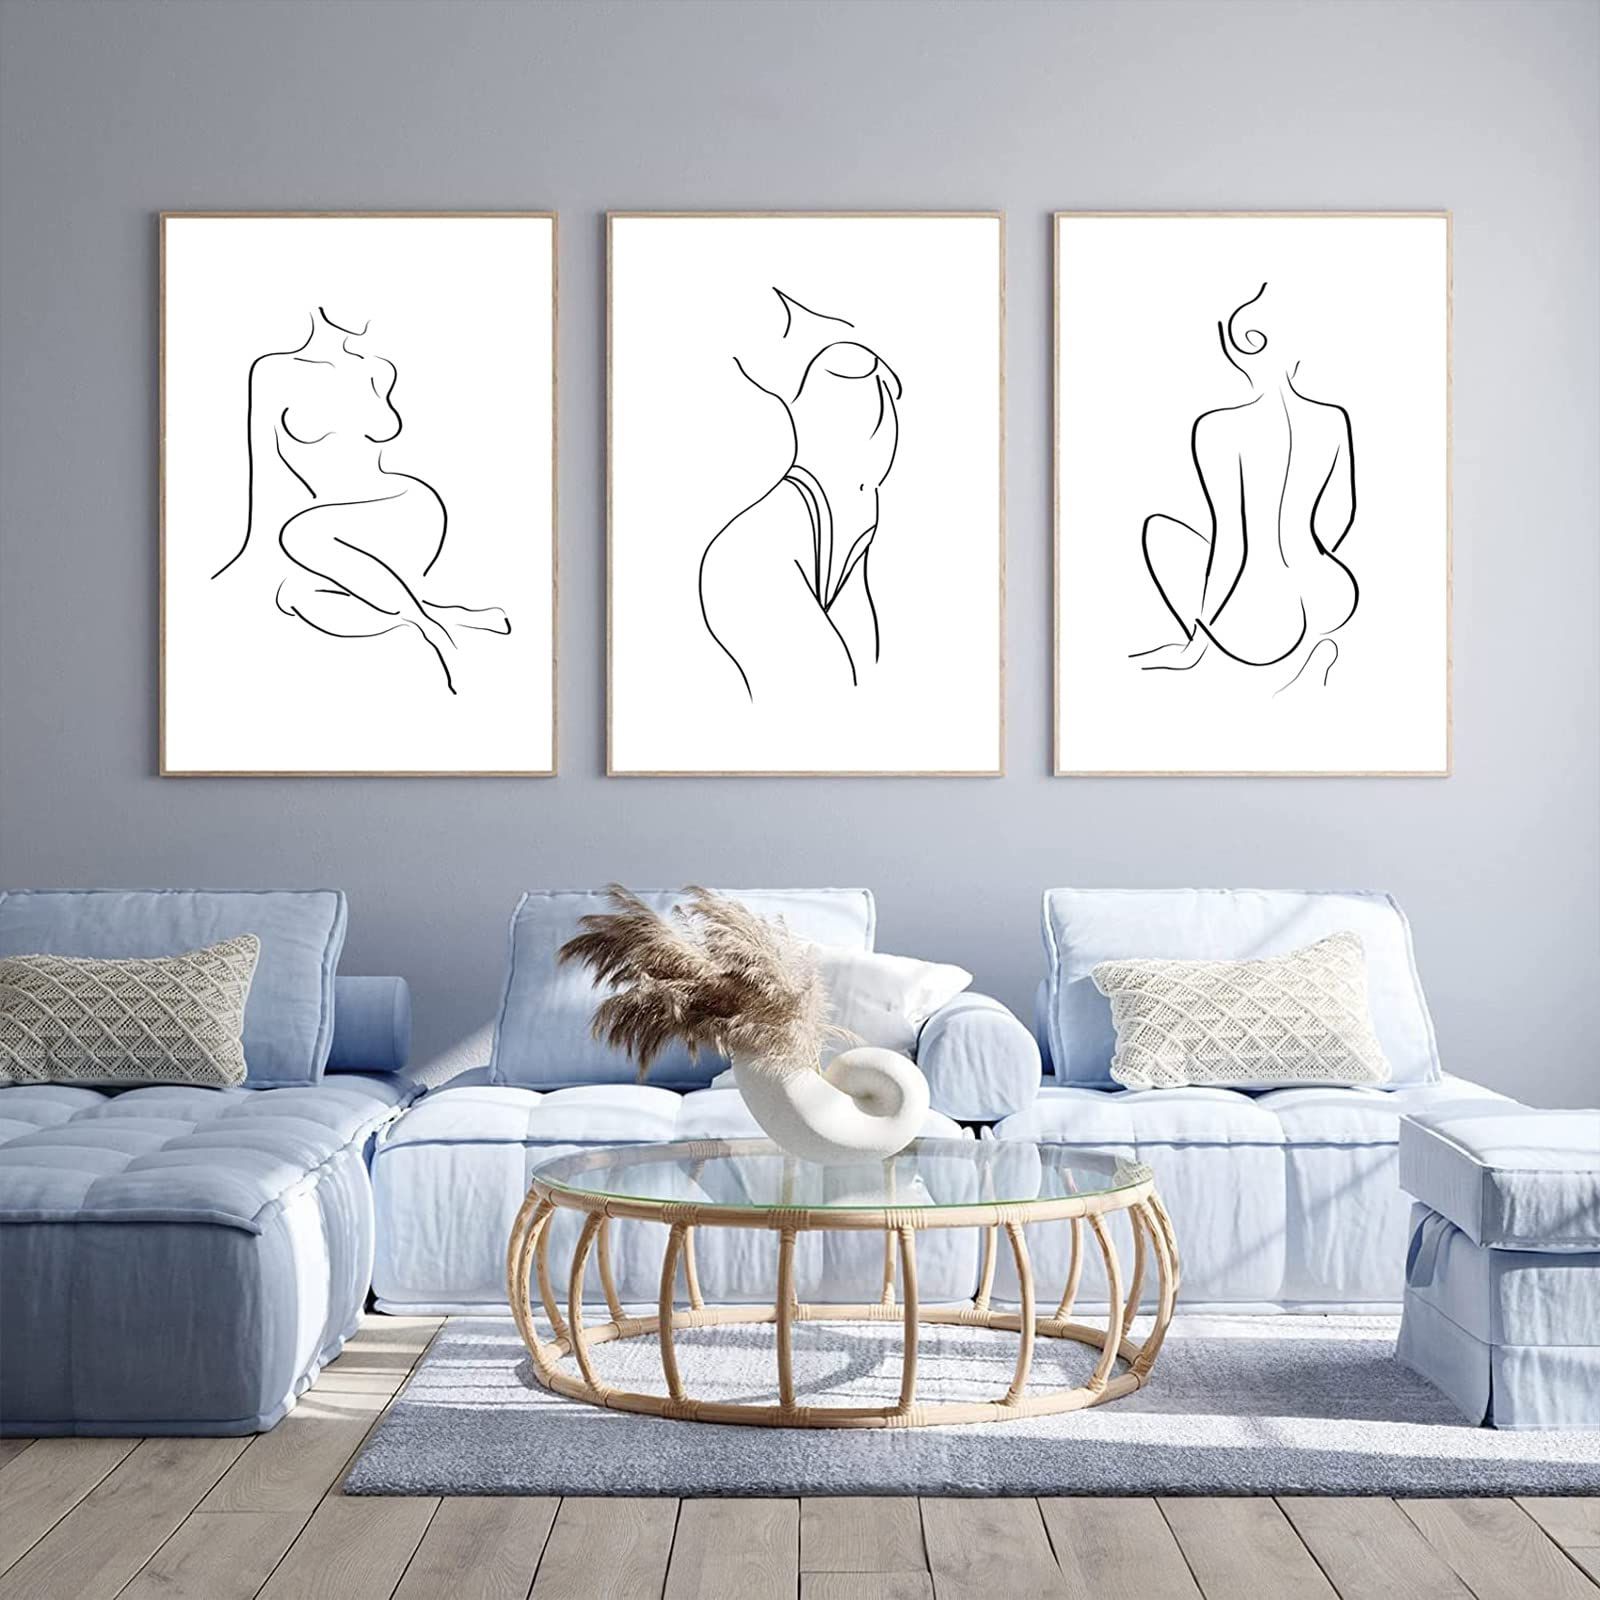 Widely Used Abstract Silhouette Wall Sculptures Throughout Amazon: Minimalist Line Wall Art Woman Body Outline Wall Art Prints  Women Figure Drawing Painting Body Line Art Wall Decor Female Wall Art  Abstract Woman Silhouette Canvas Art Aesthetic 16x24x3 Inch Unframed: (View 7 of 15)